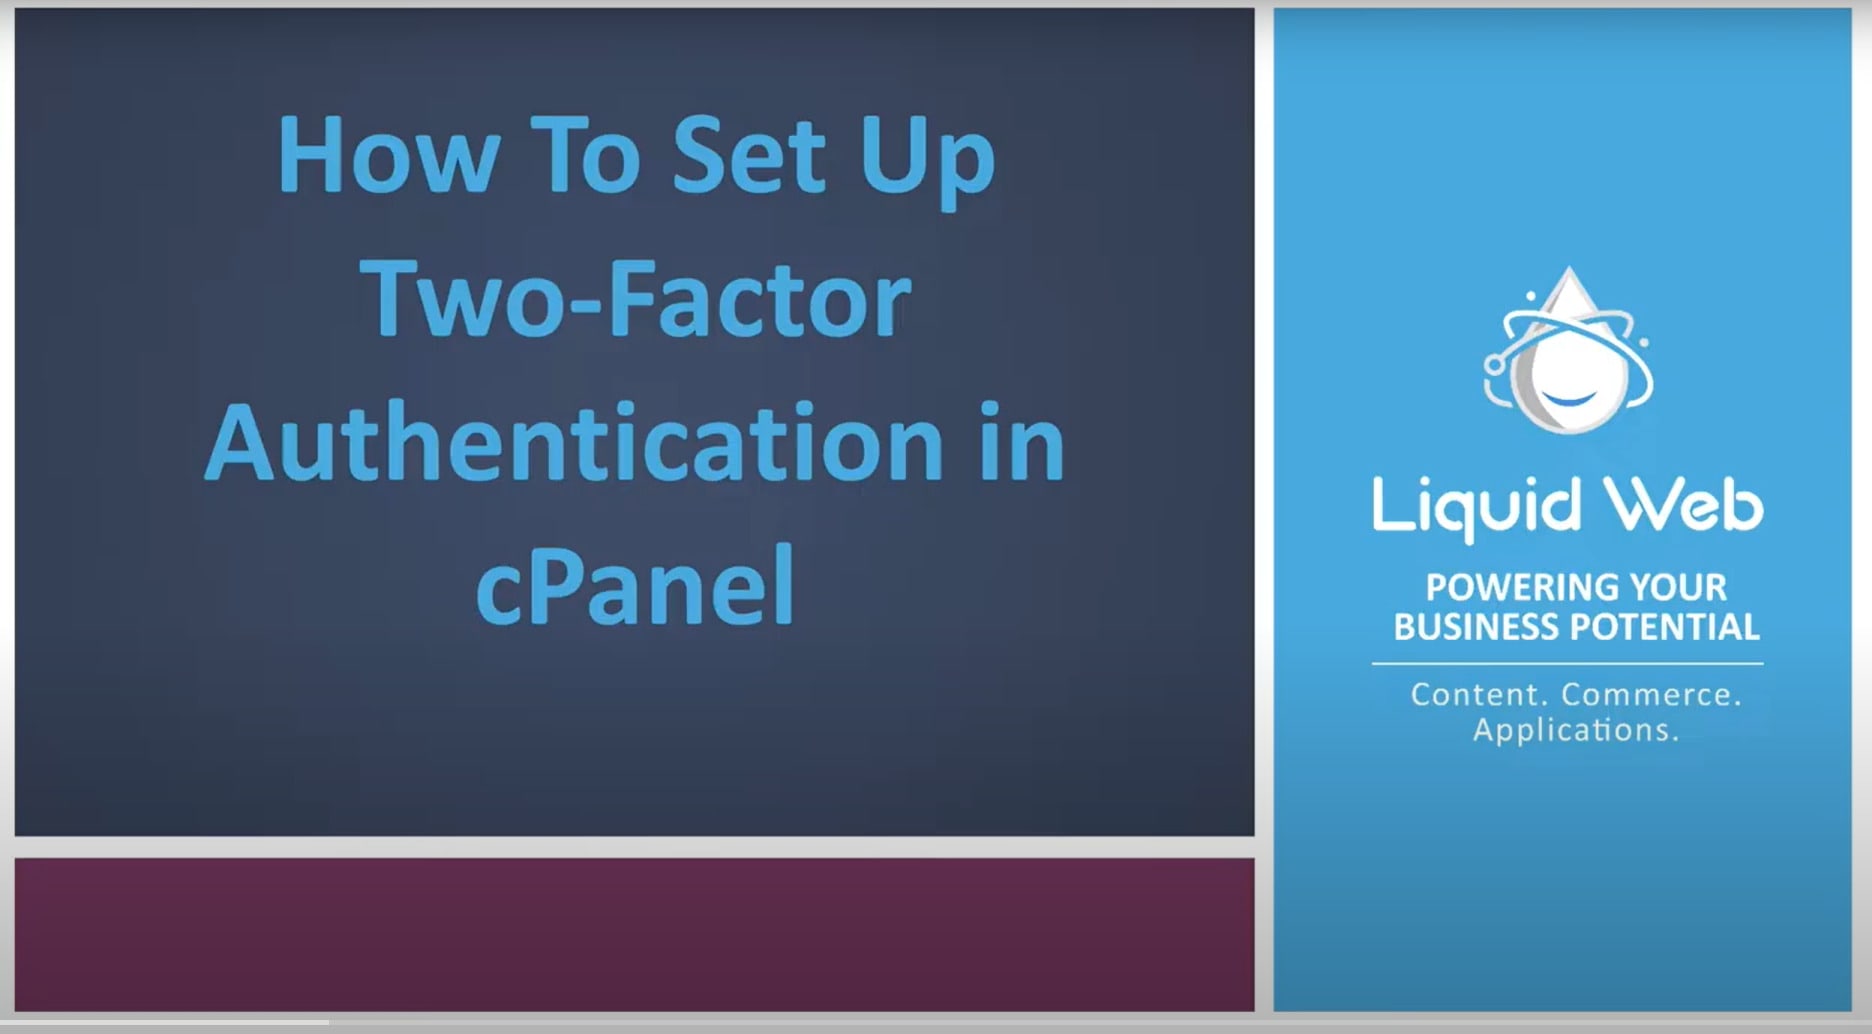 How To Set Up Two-Factor Authentication in cPanel